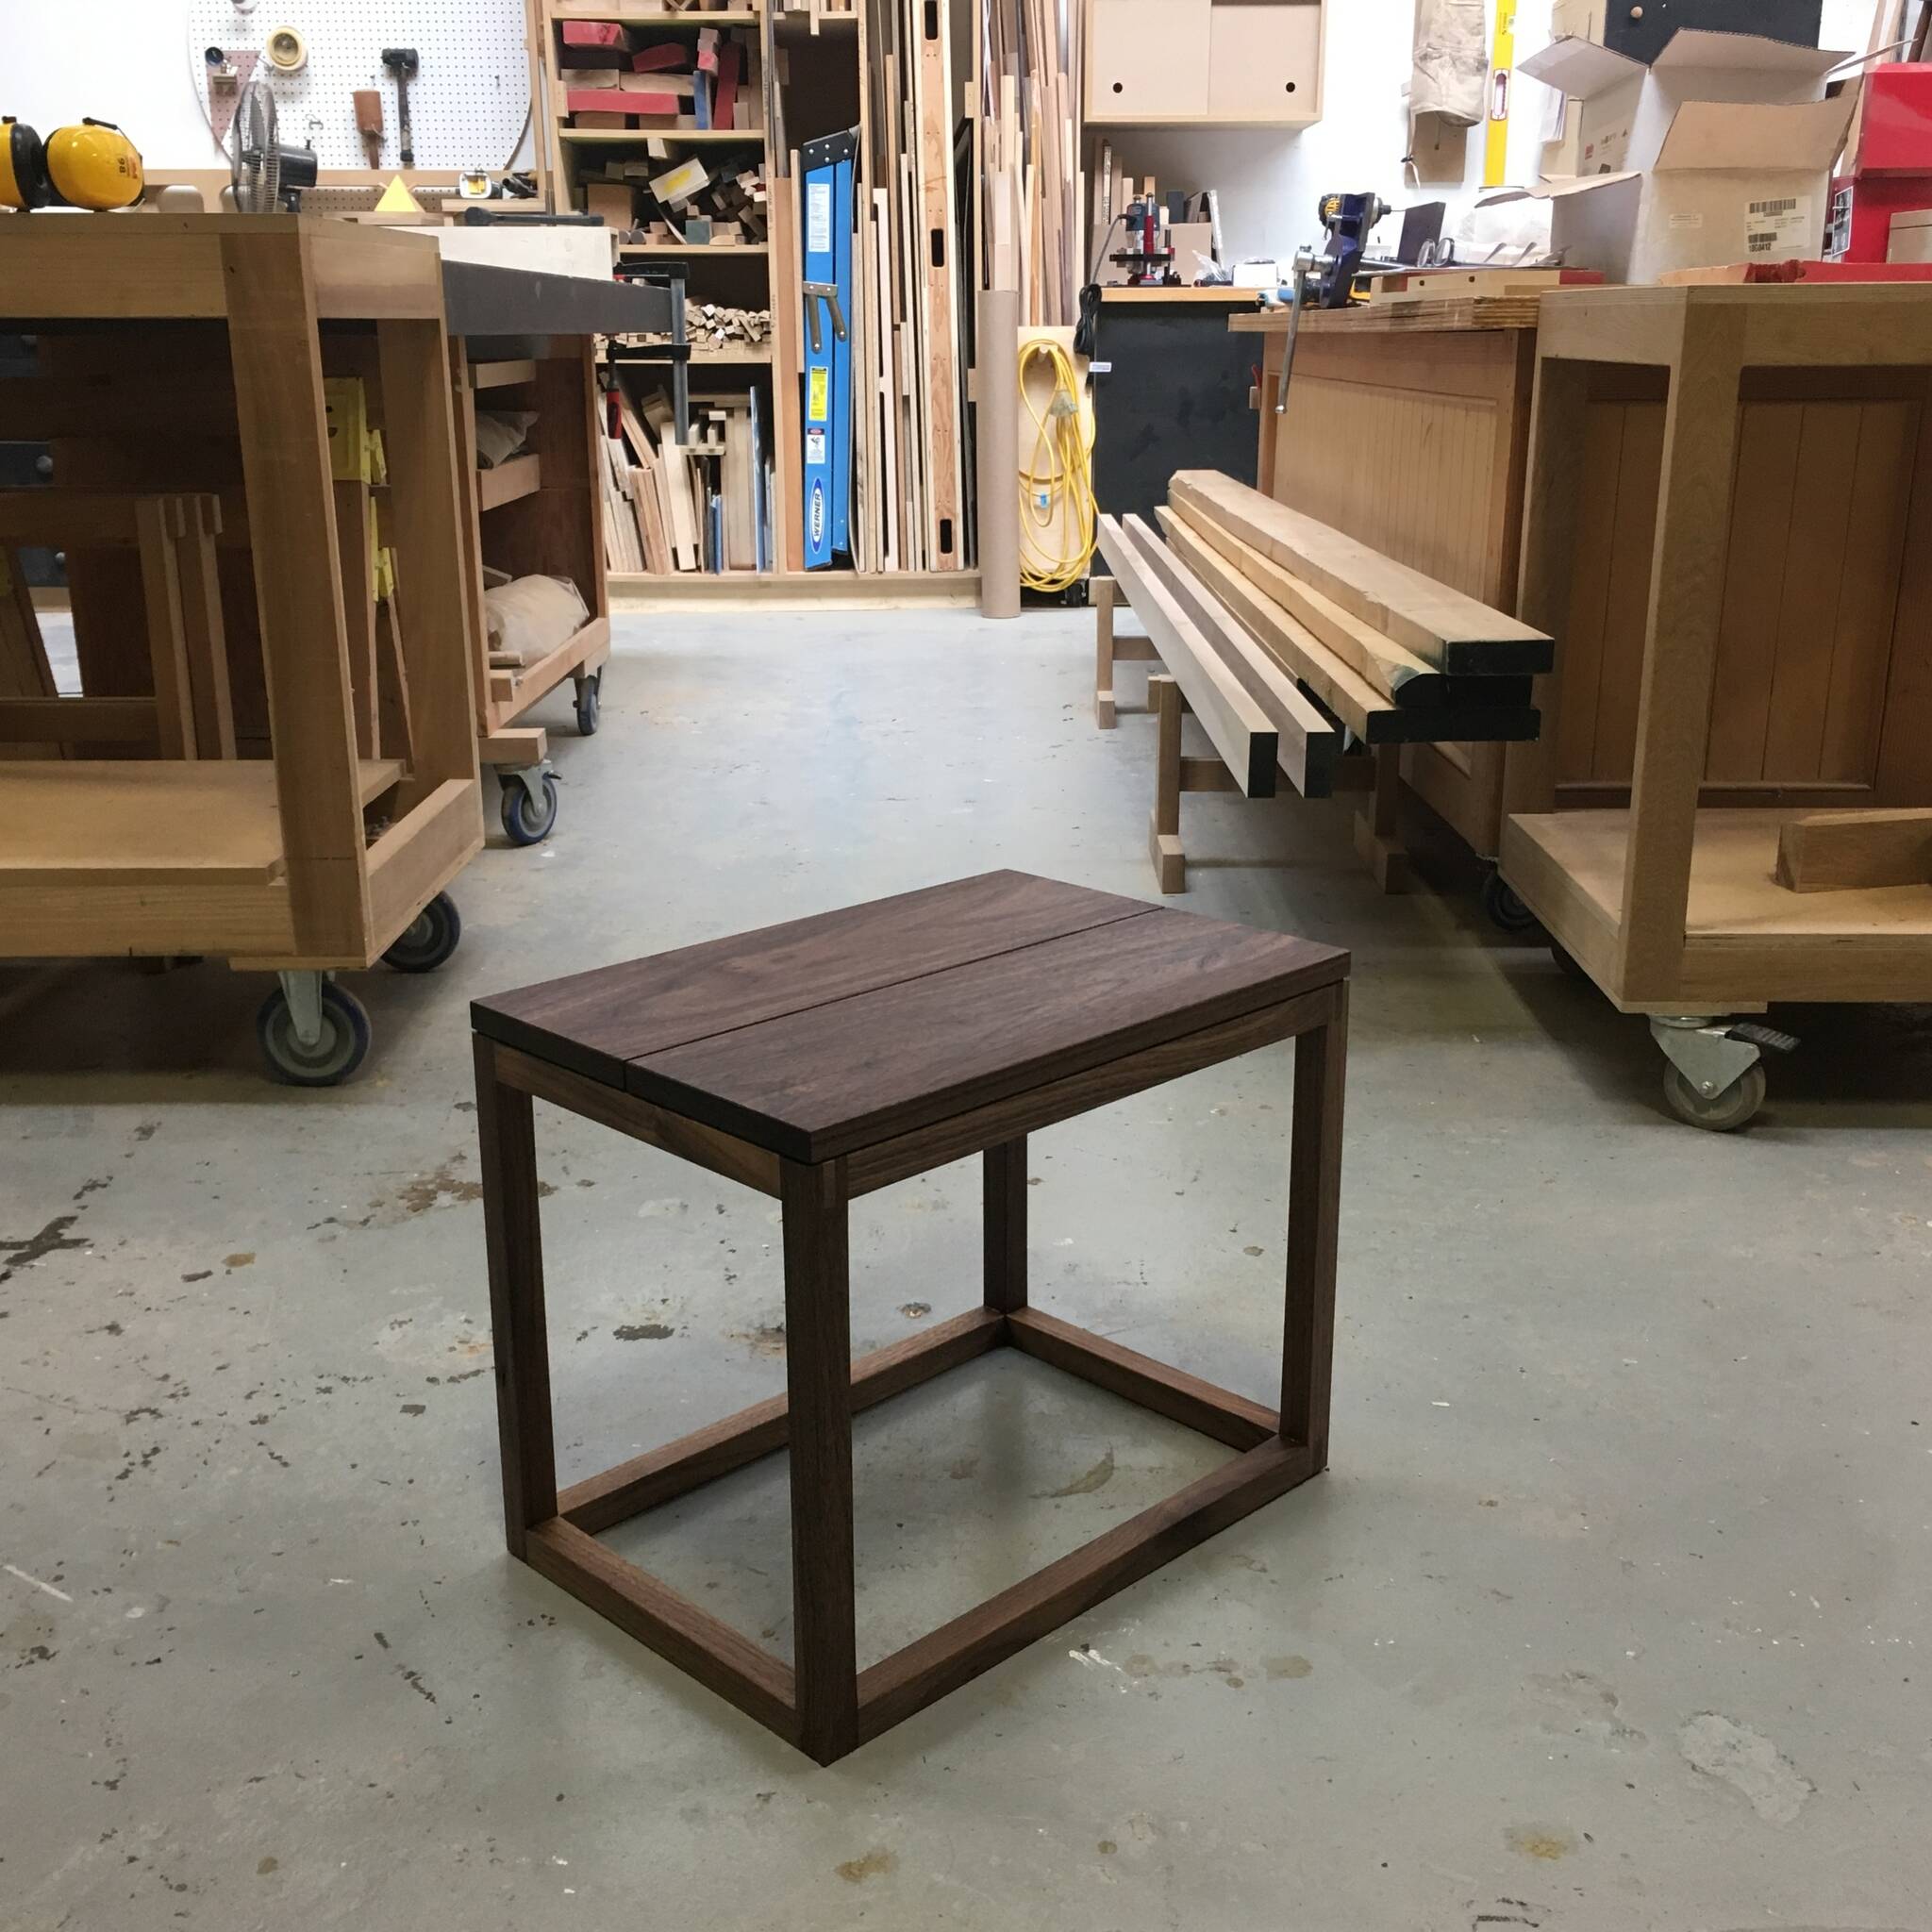 Woodworking classes